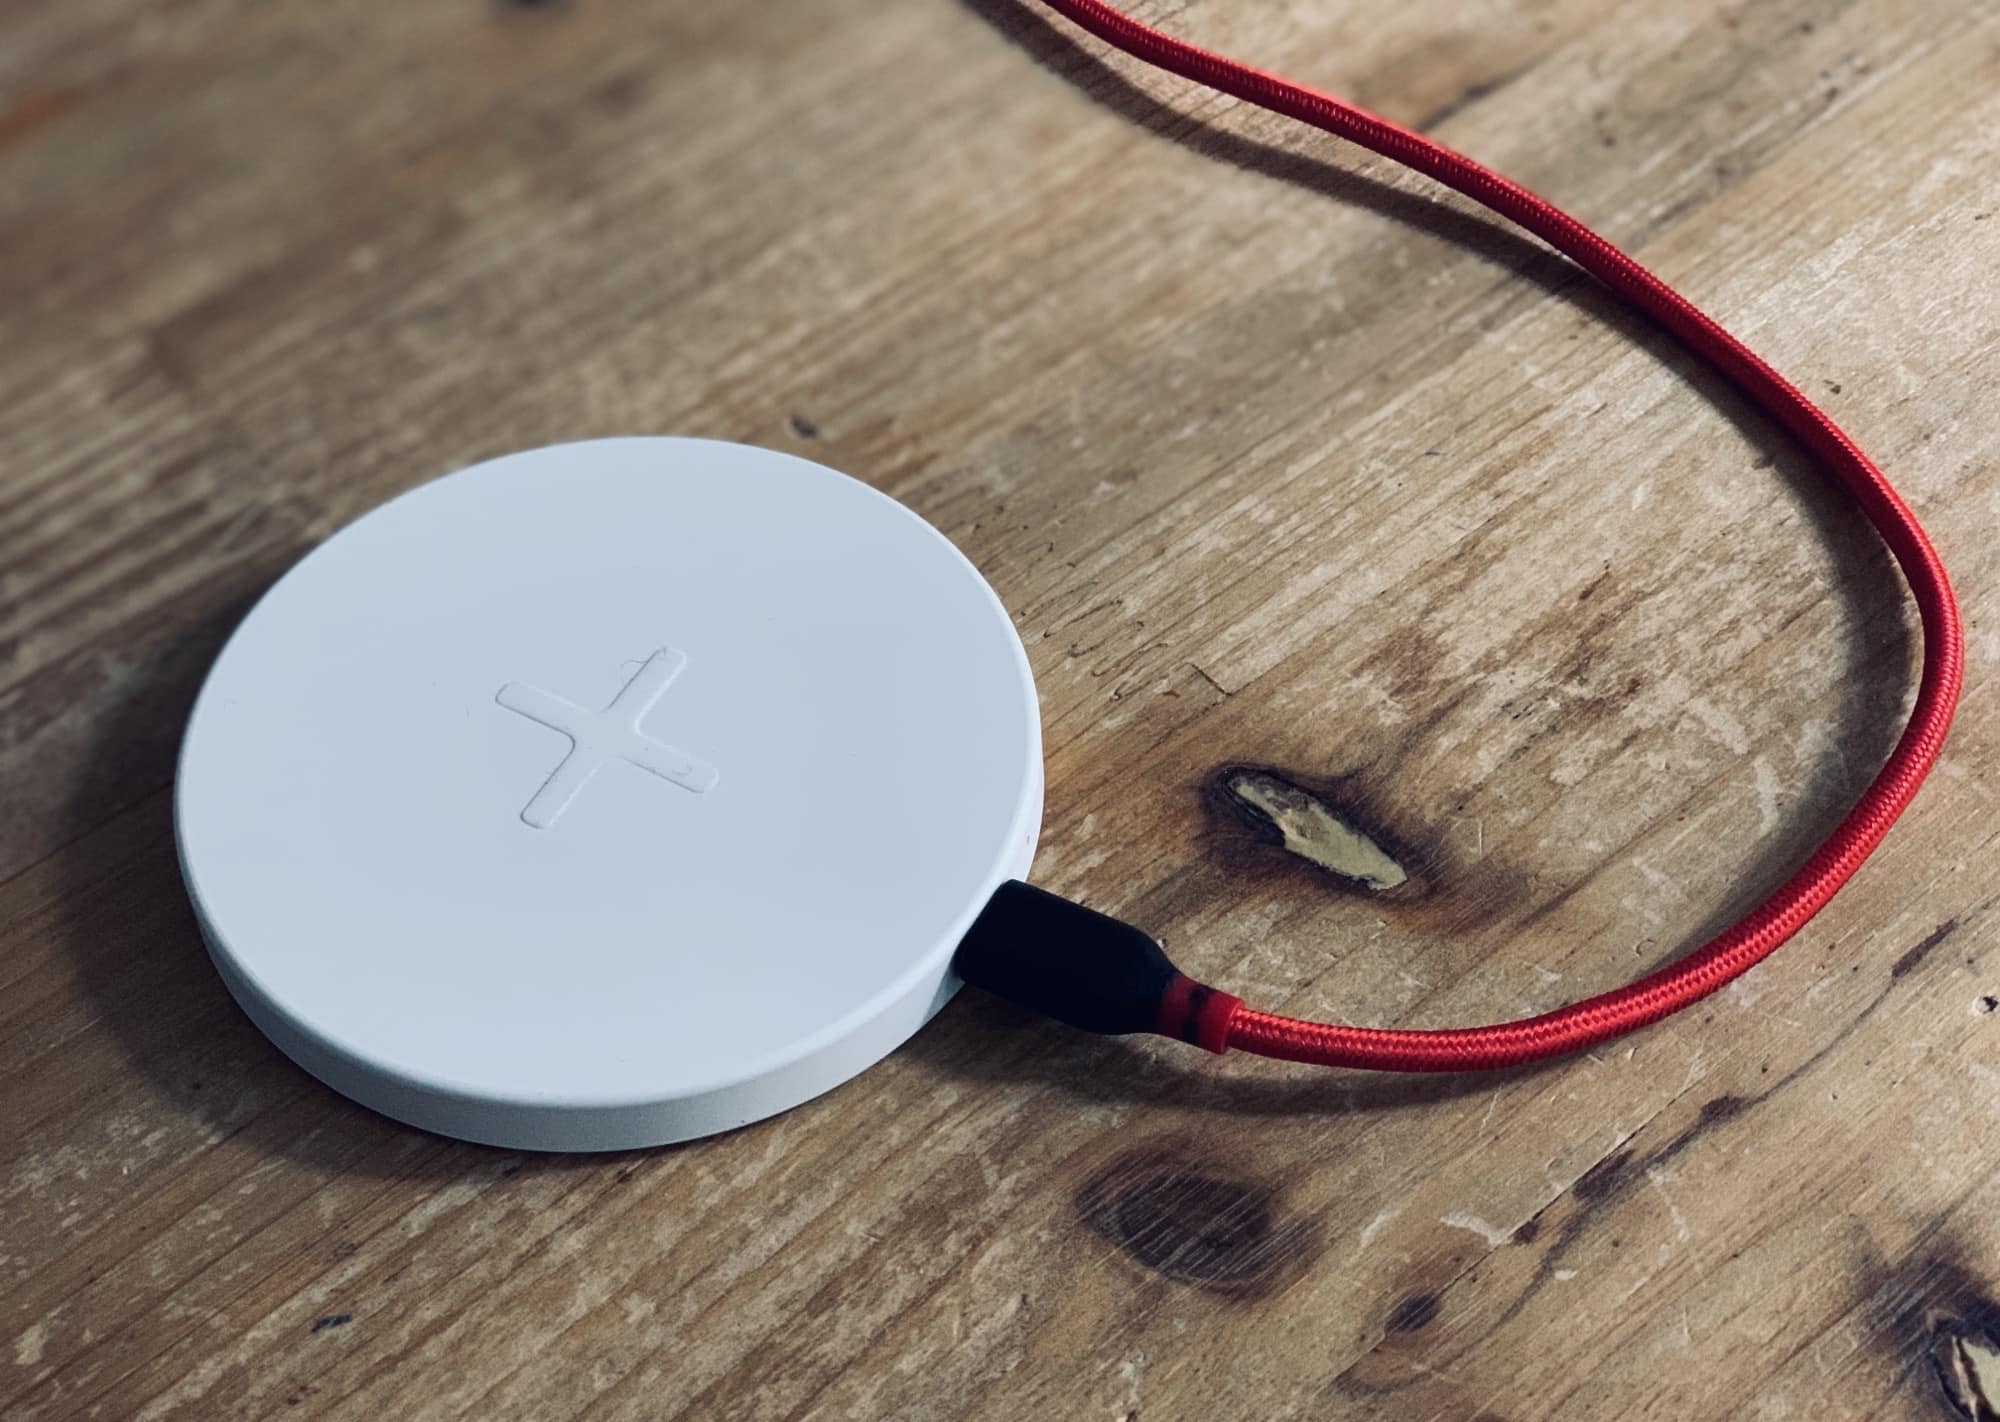 Ikea Livboj review: This cheap wireless charger comes without a cable or a charger.